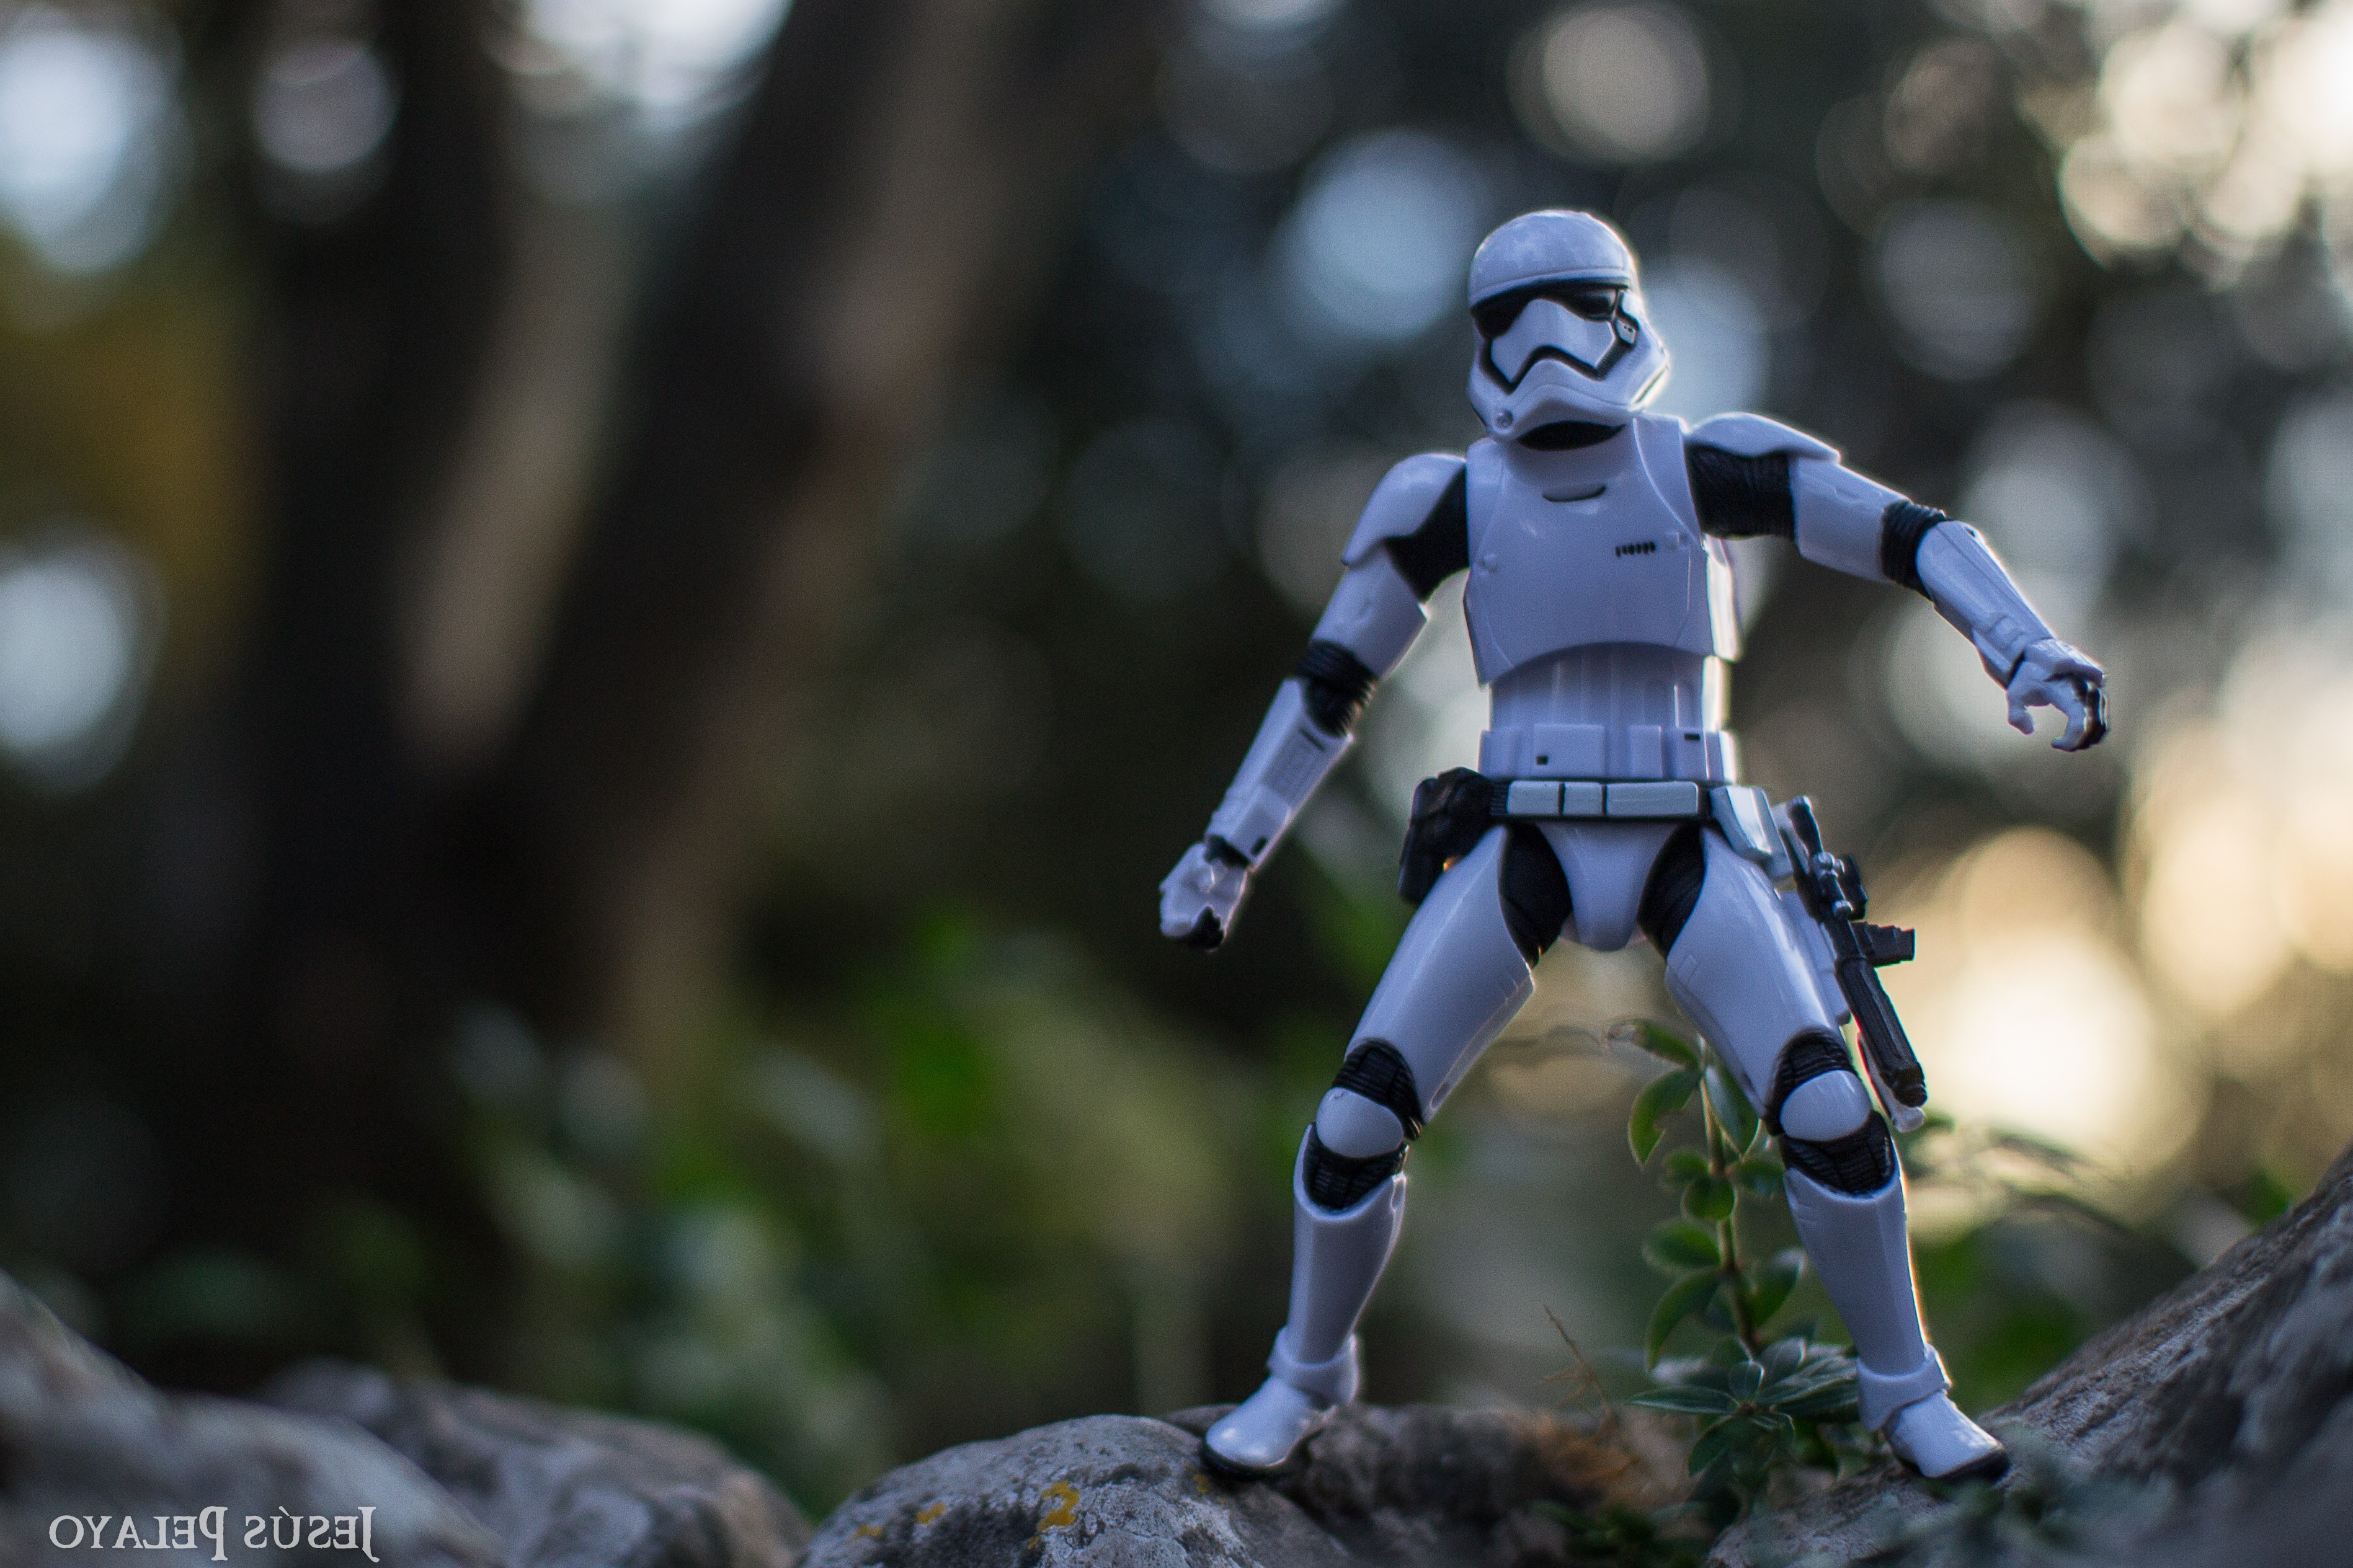 stormtrooper, First Order, TR 8R, Star Wars, Star Wars: The Force Awakens, Action Figures, Sick Spins, Toys Wallpaper